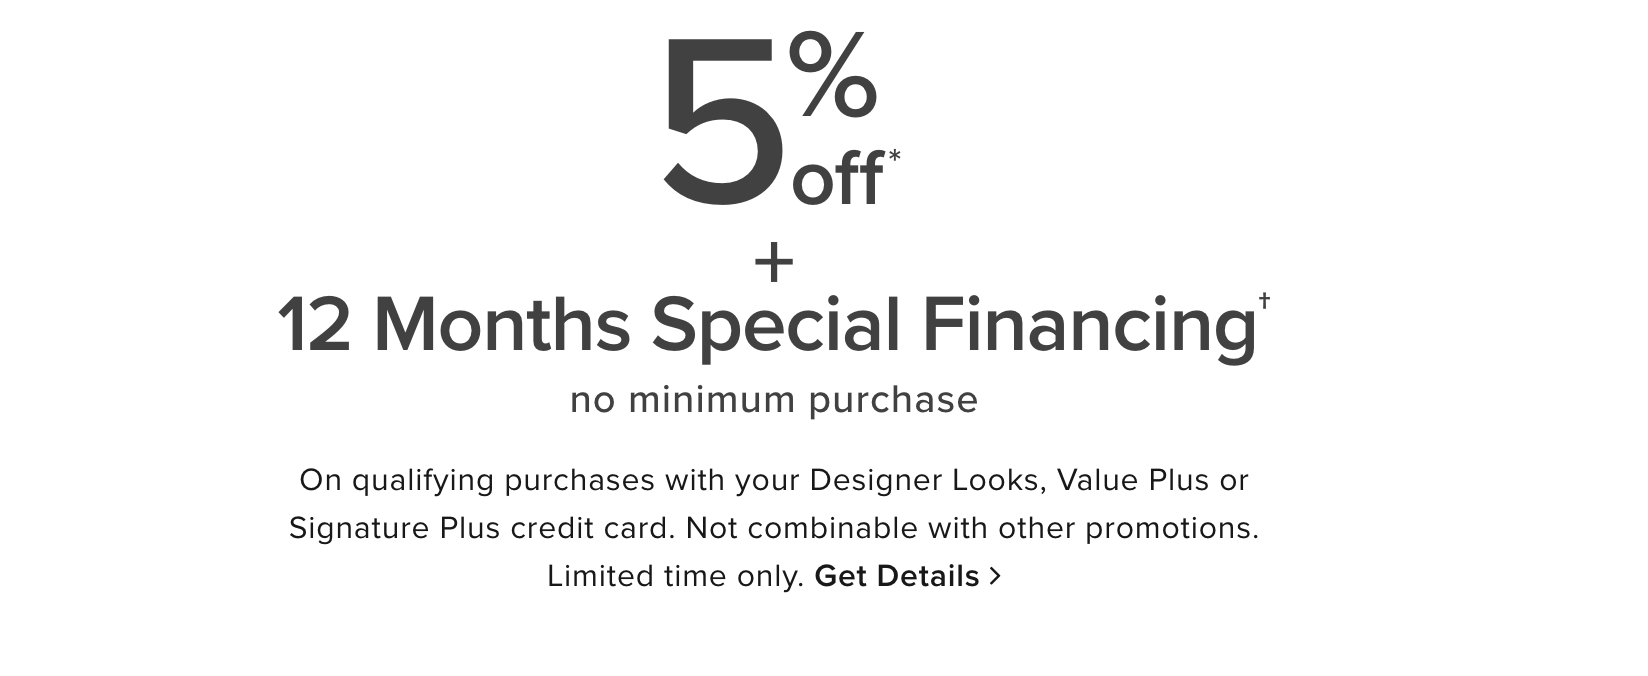 12 Month Financing Offer